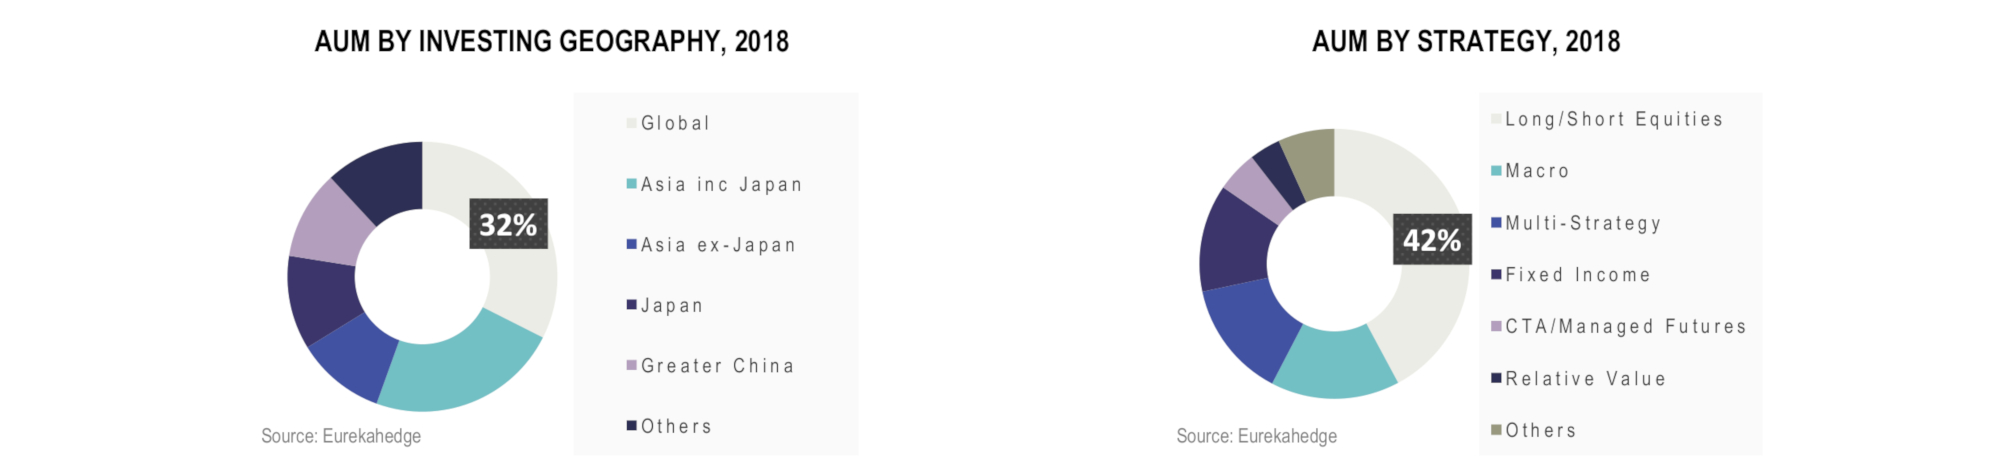 Asian Hedge Funds Infographic April 2018 - aum by investing geography and strategy